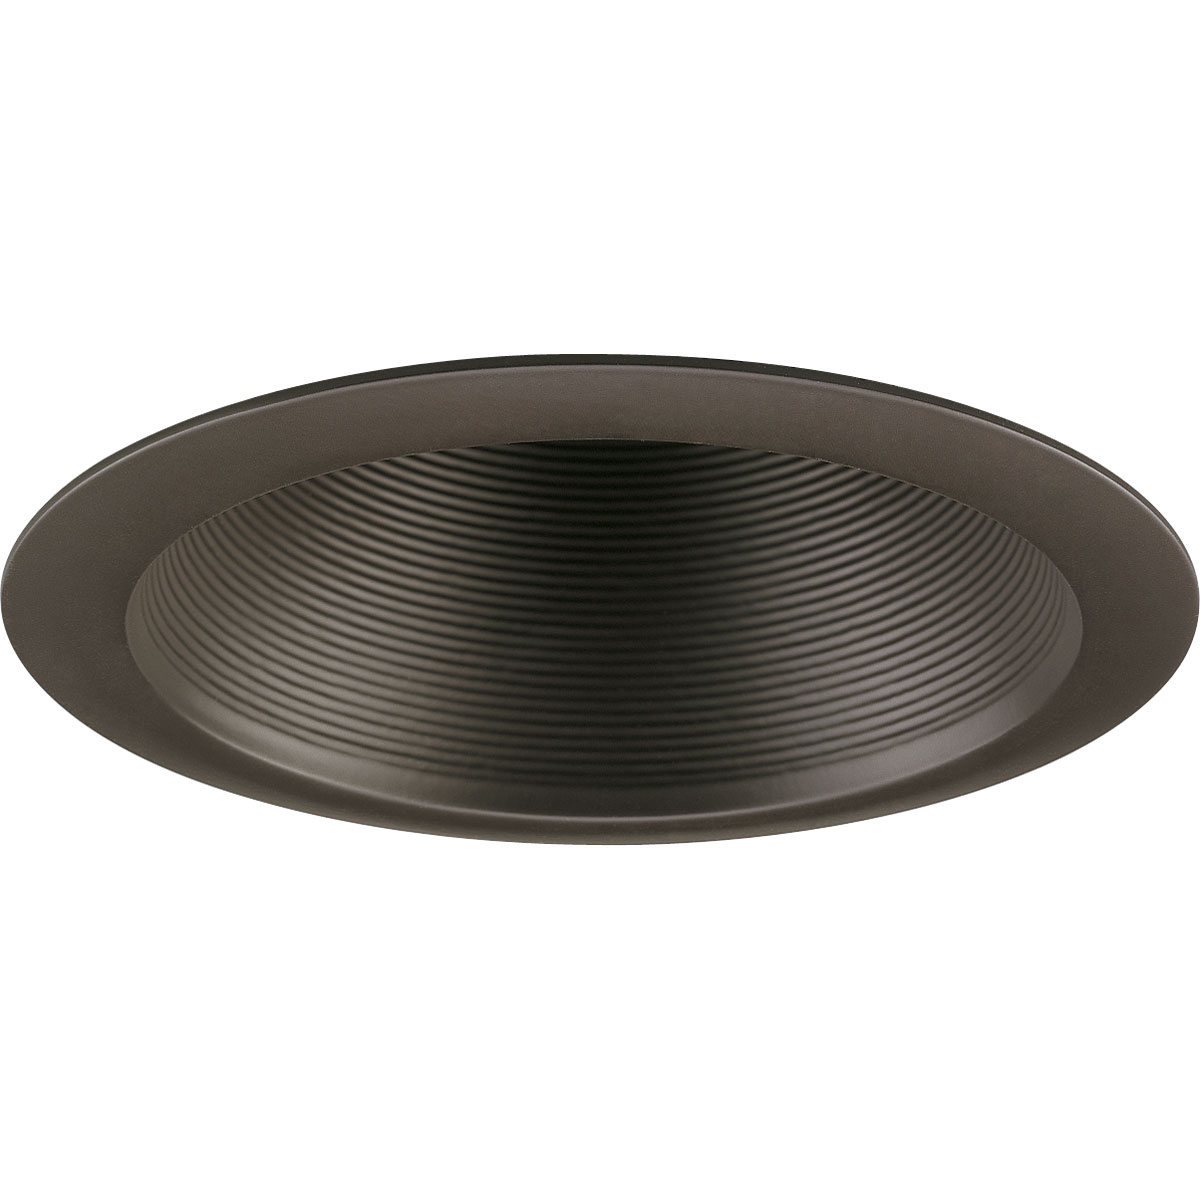 A multi-groove Step Baffle in an Antique Bronze finish for use with insulated ceilings. 7-3/4 in outside diameter.